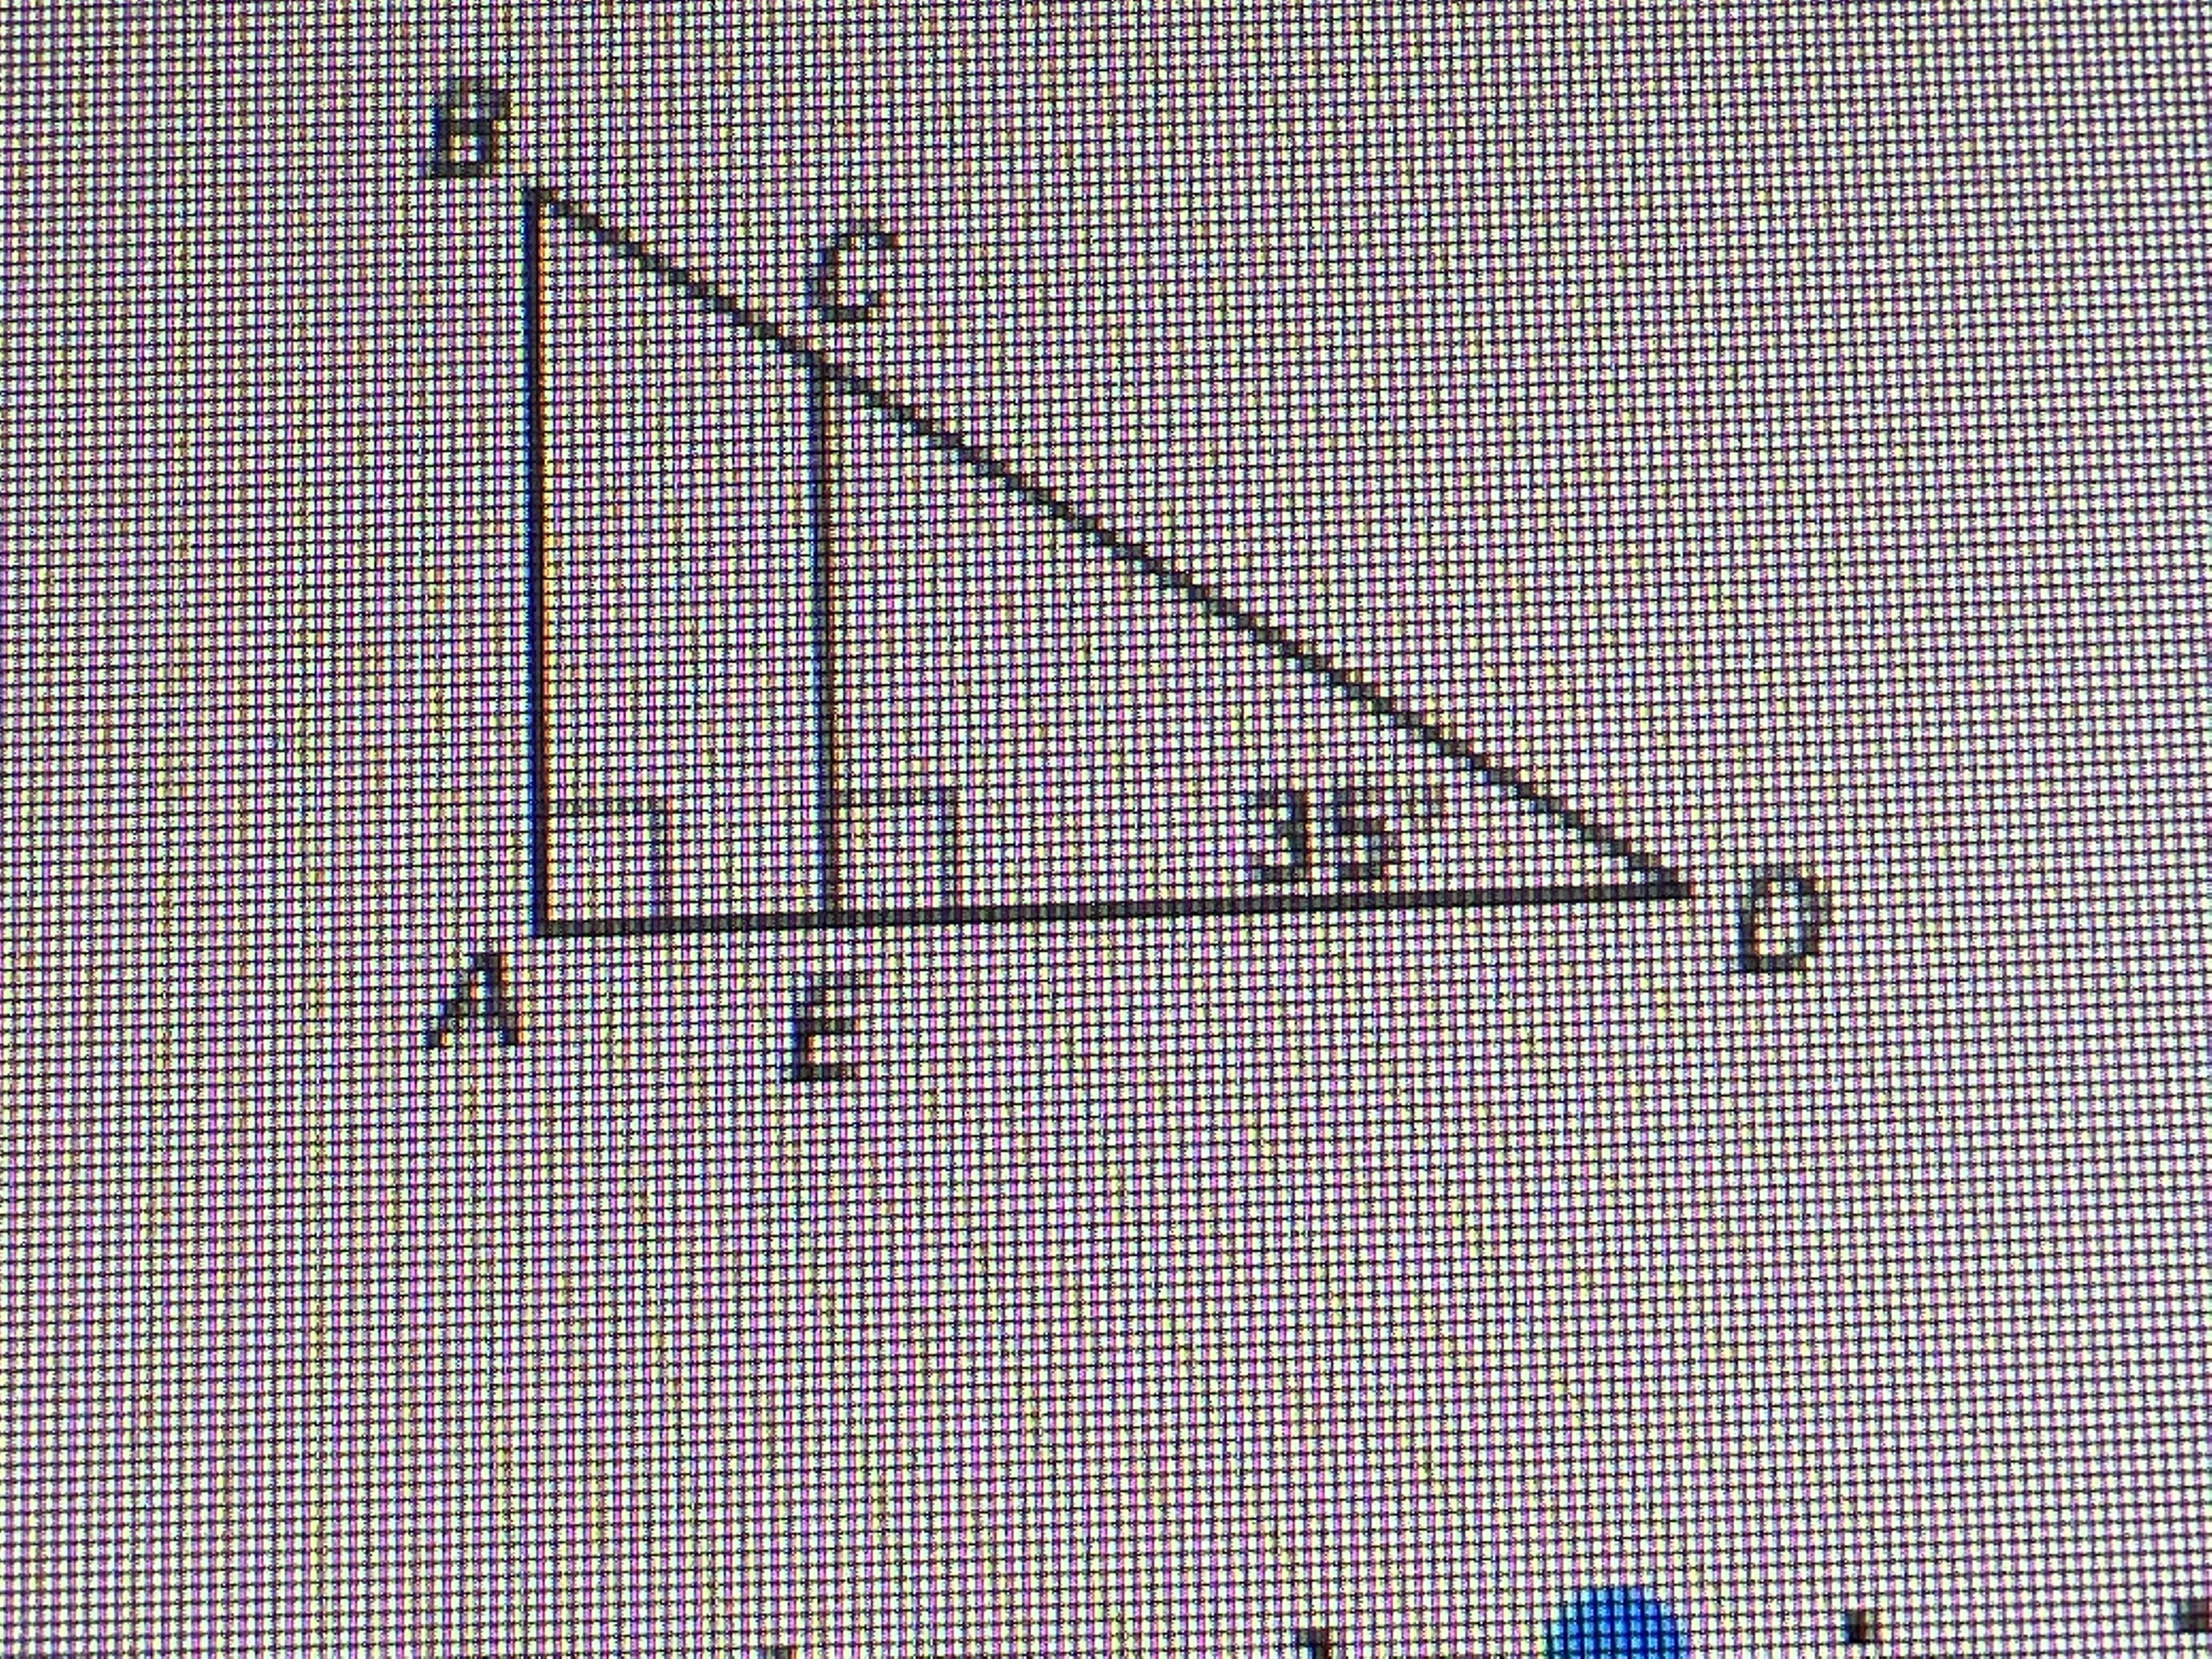 Are The Triangles Similaeu, If So Write How You Know